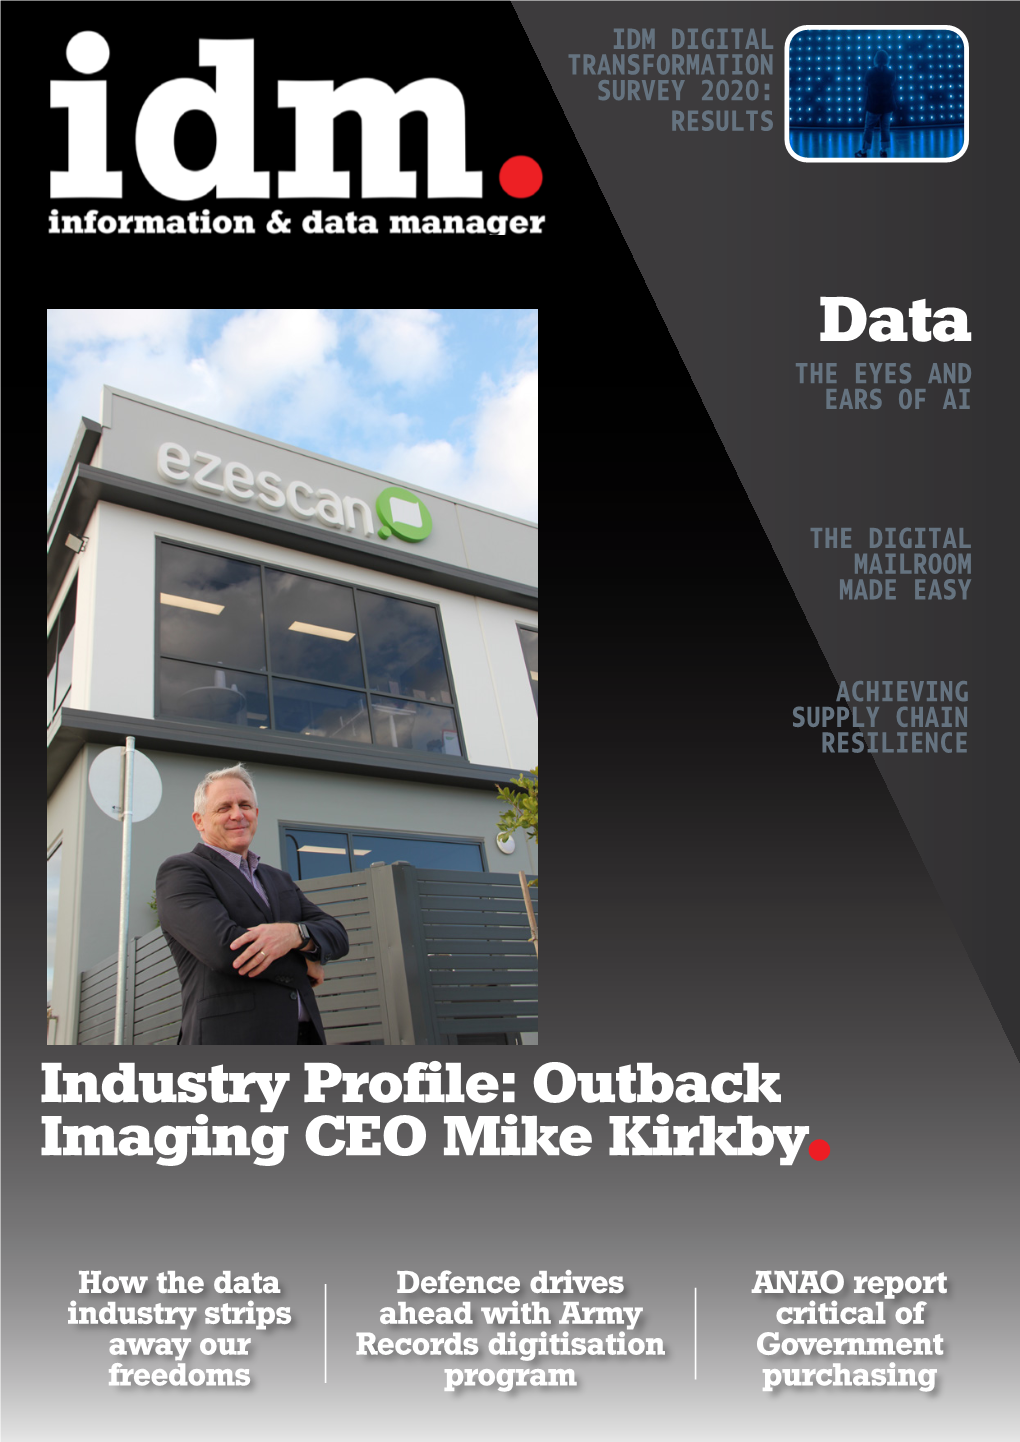 Industry Profile: Outback Imaging CEO Mike Kirkby